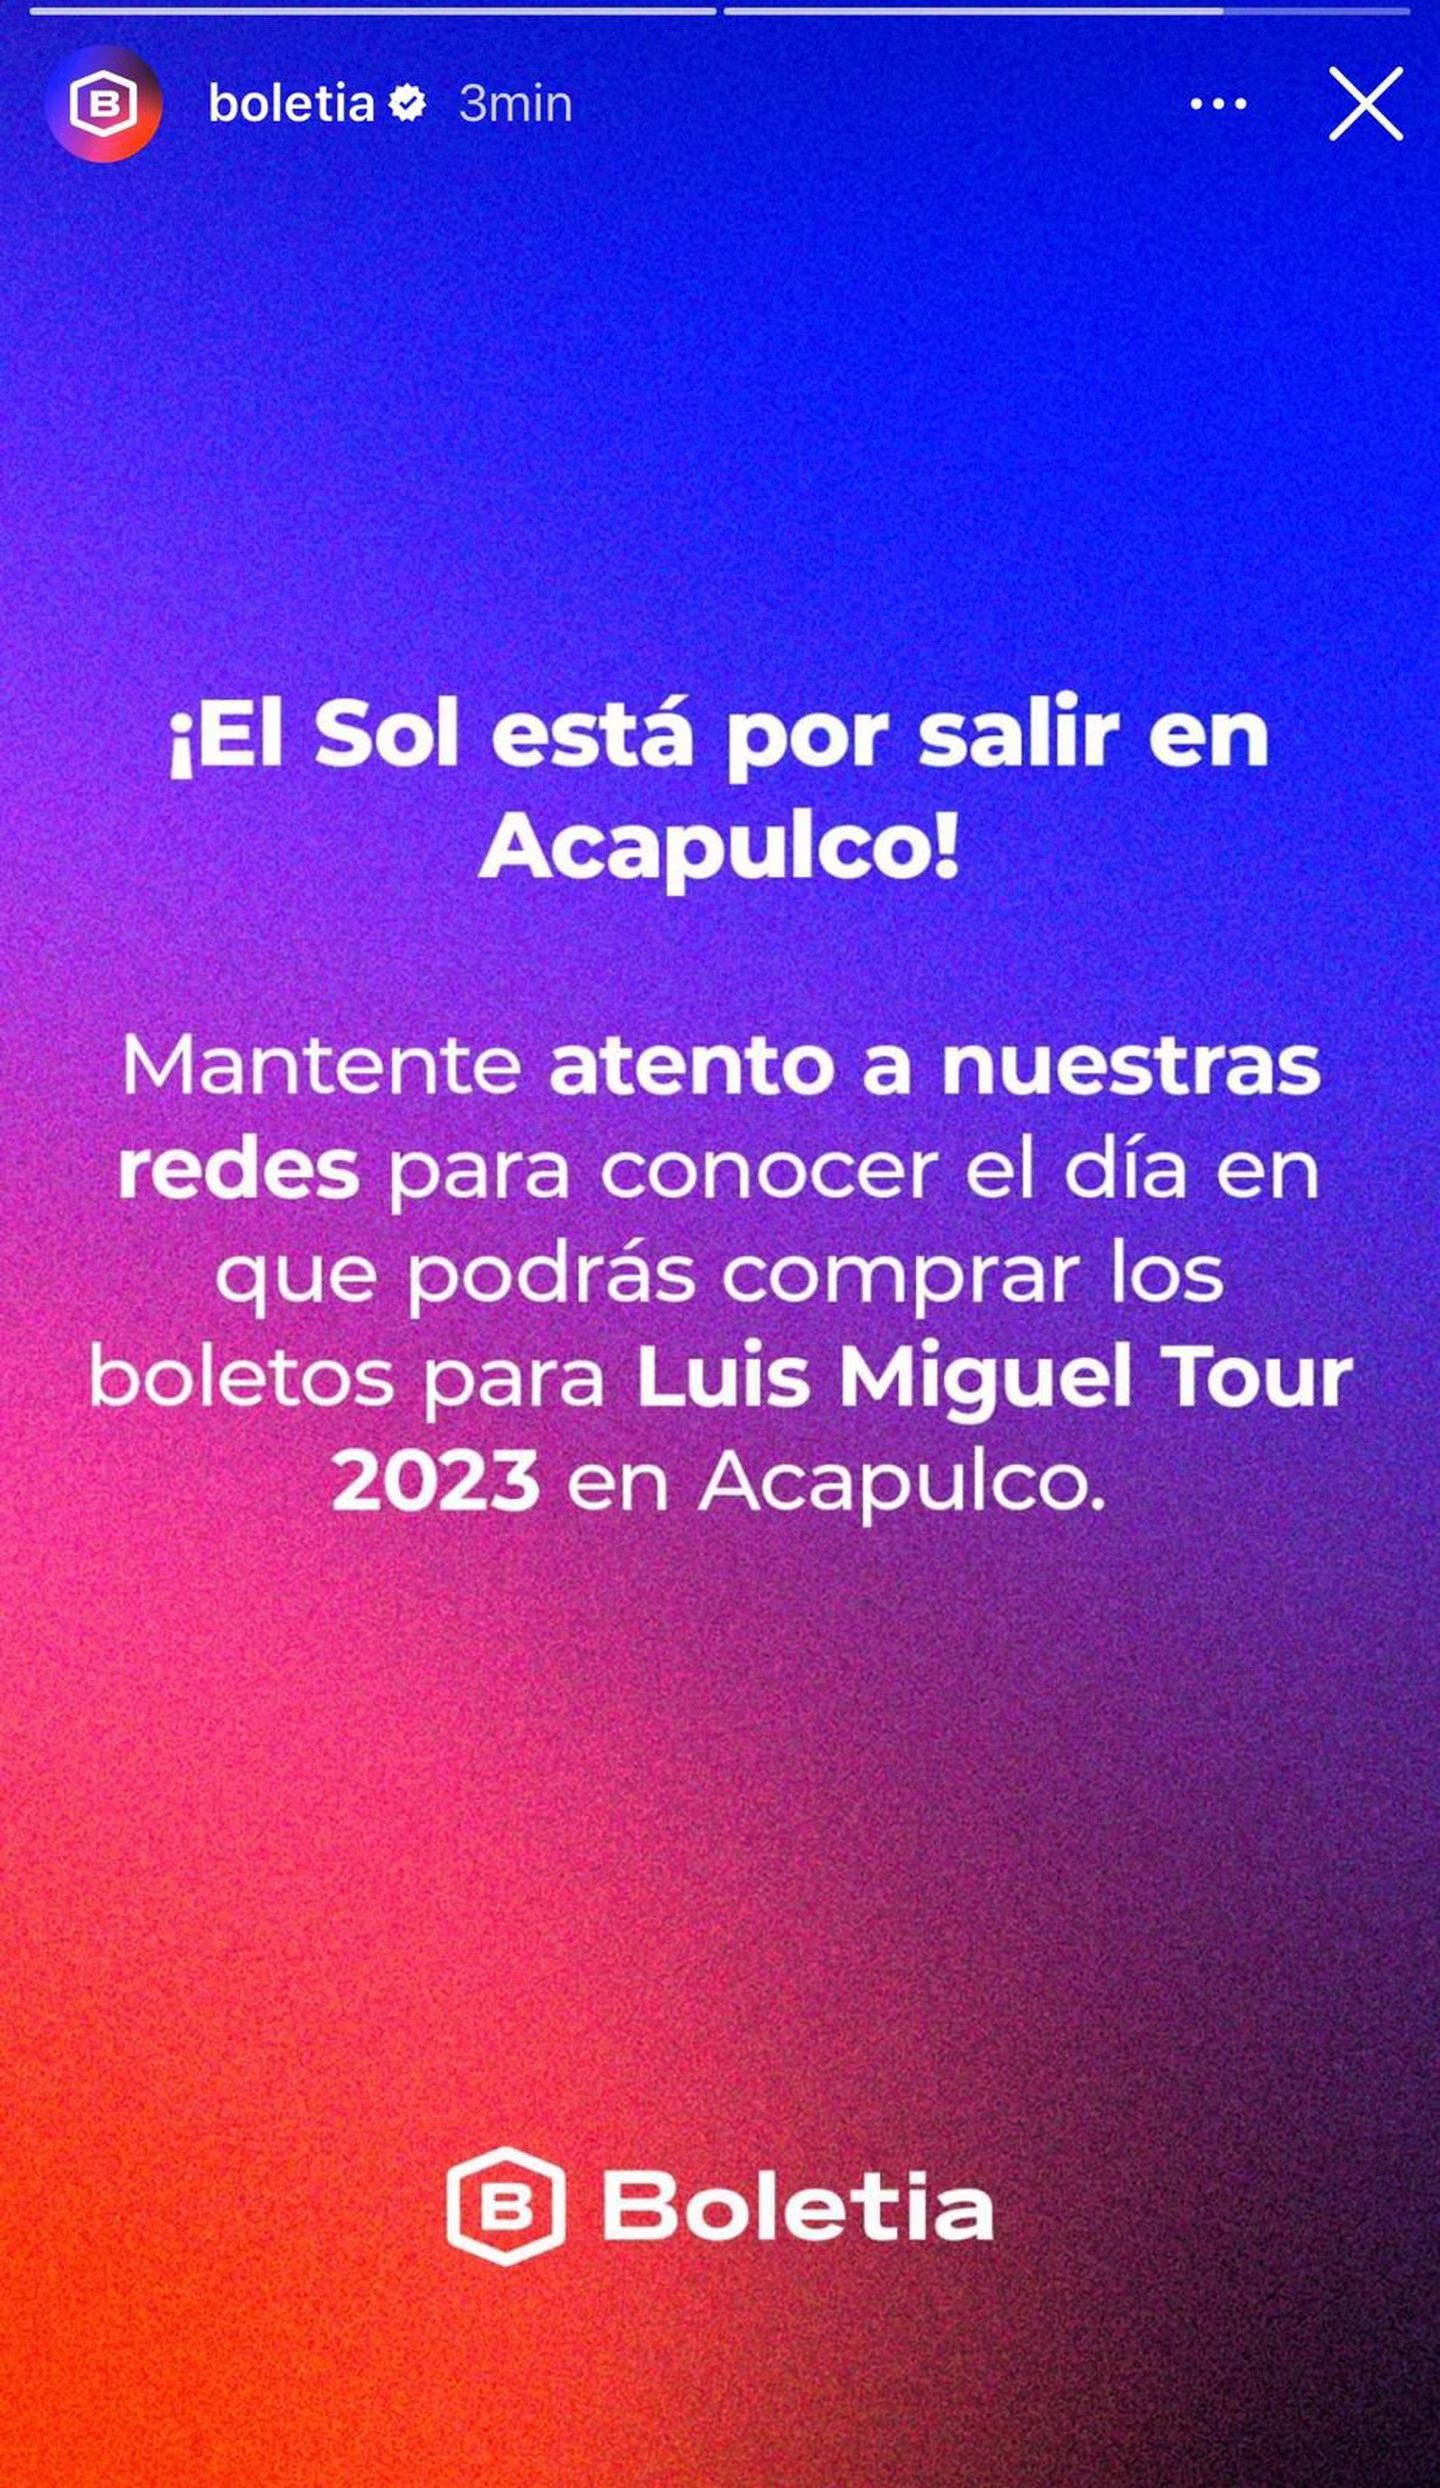 Tickets for Luis Miguel in Acapulco will be available very soon.  |  Boletia (@boletia).